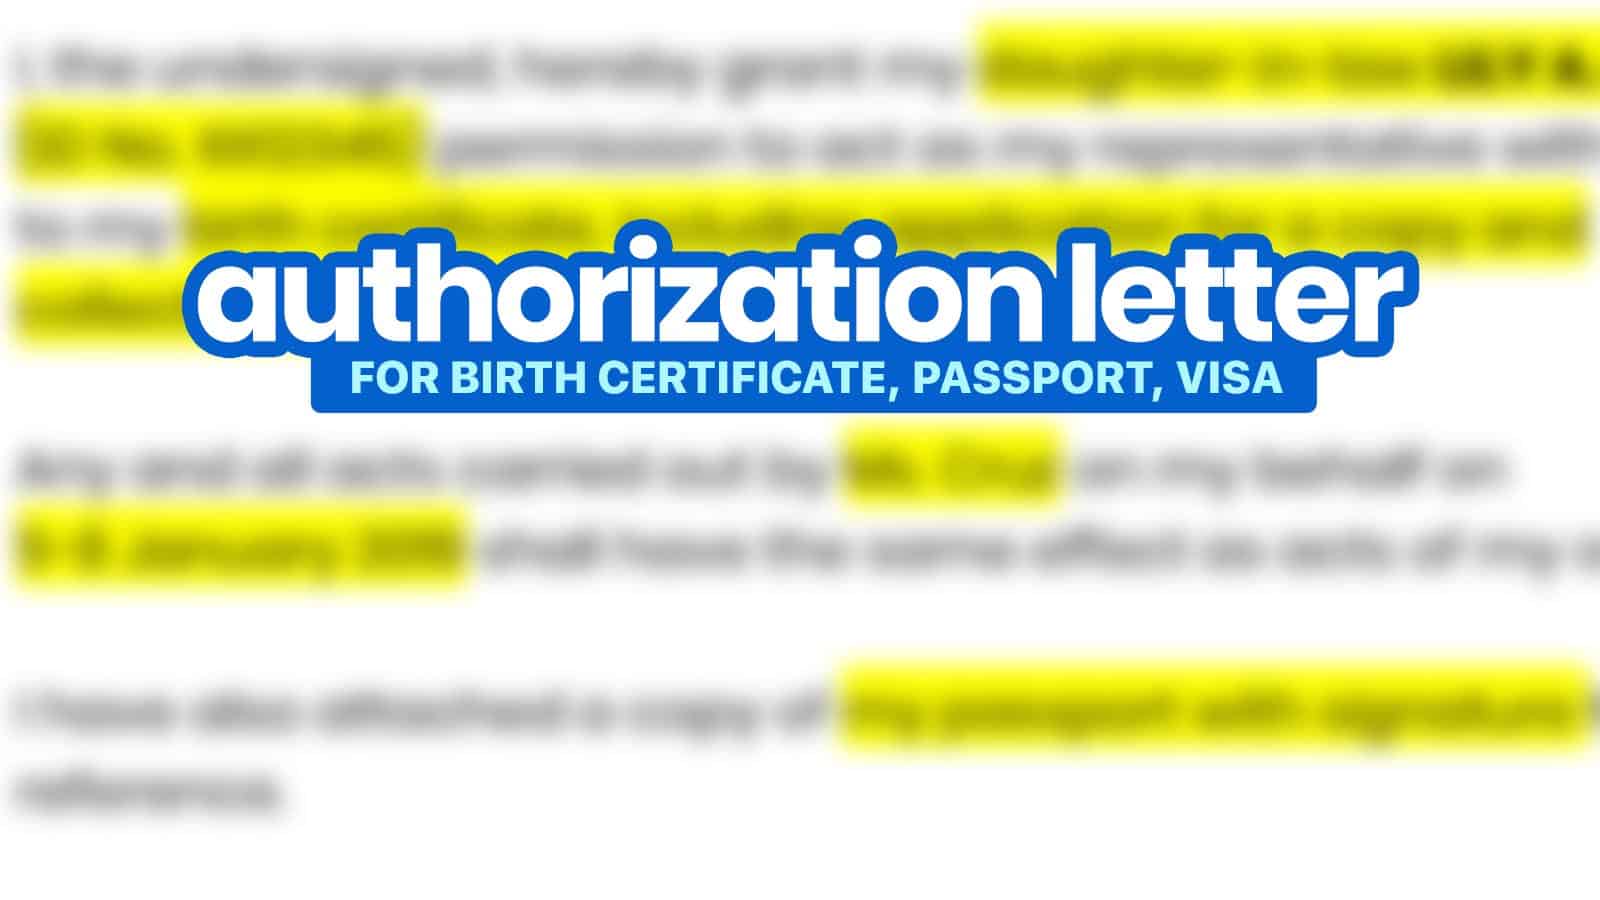 Sample Authorization Letters The Poor Traveler Itinerary Blog